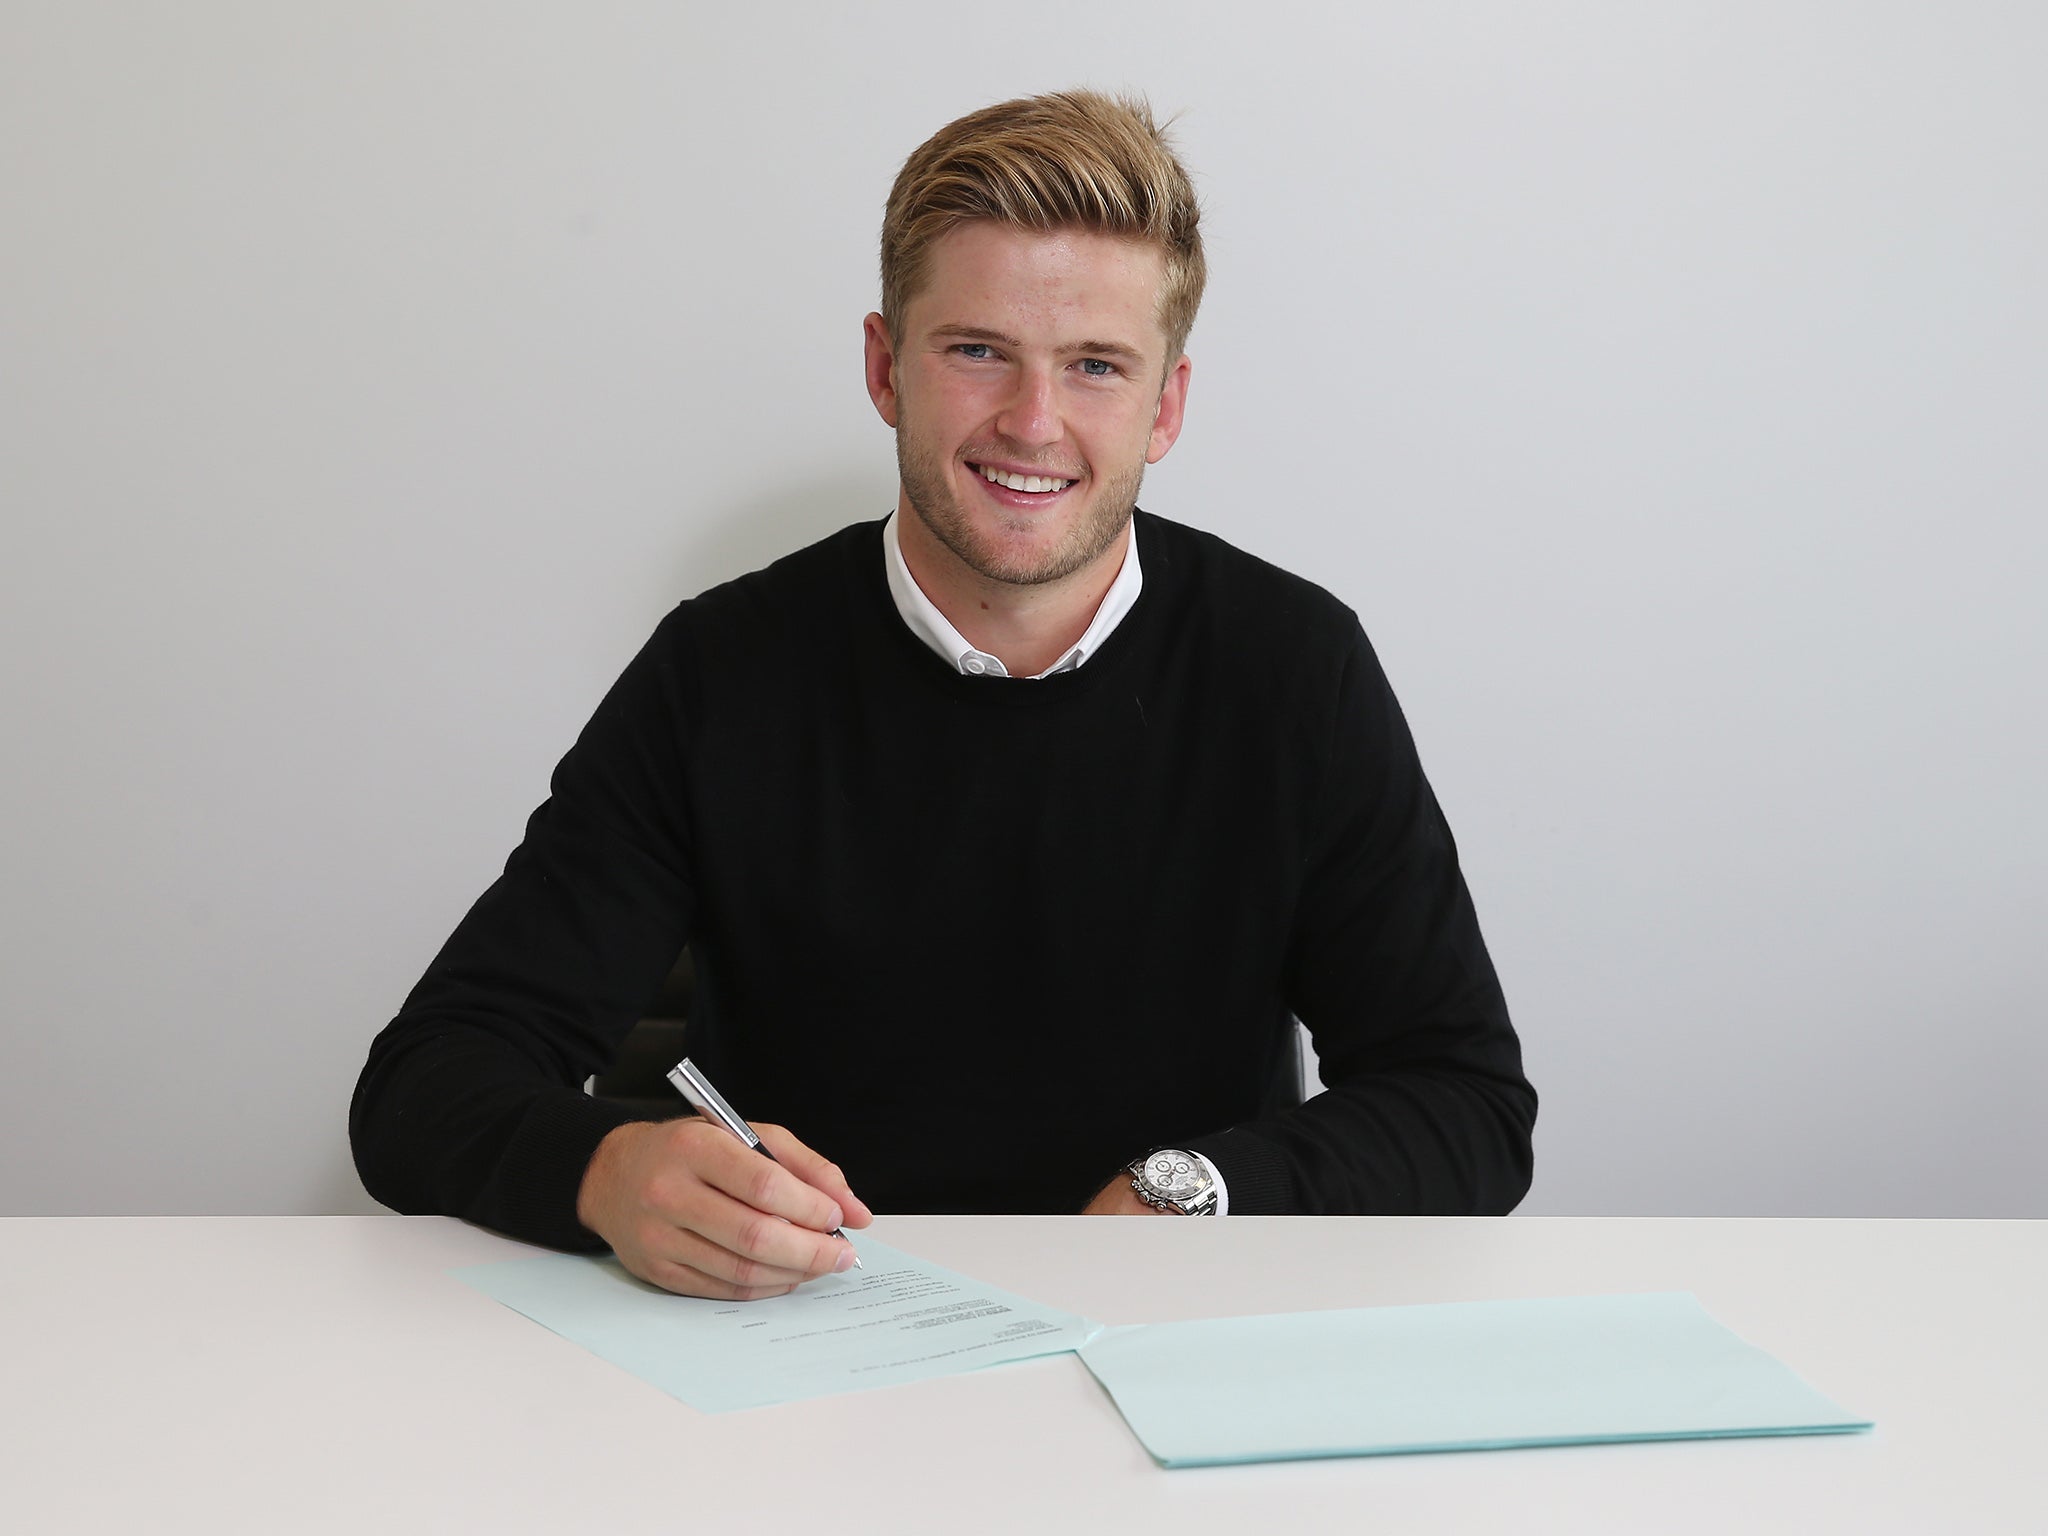 Eric Dier joined Spurs in 2014 for £4m